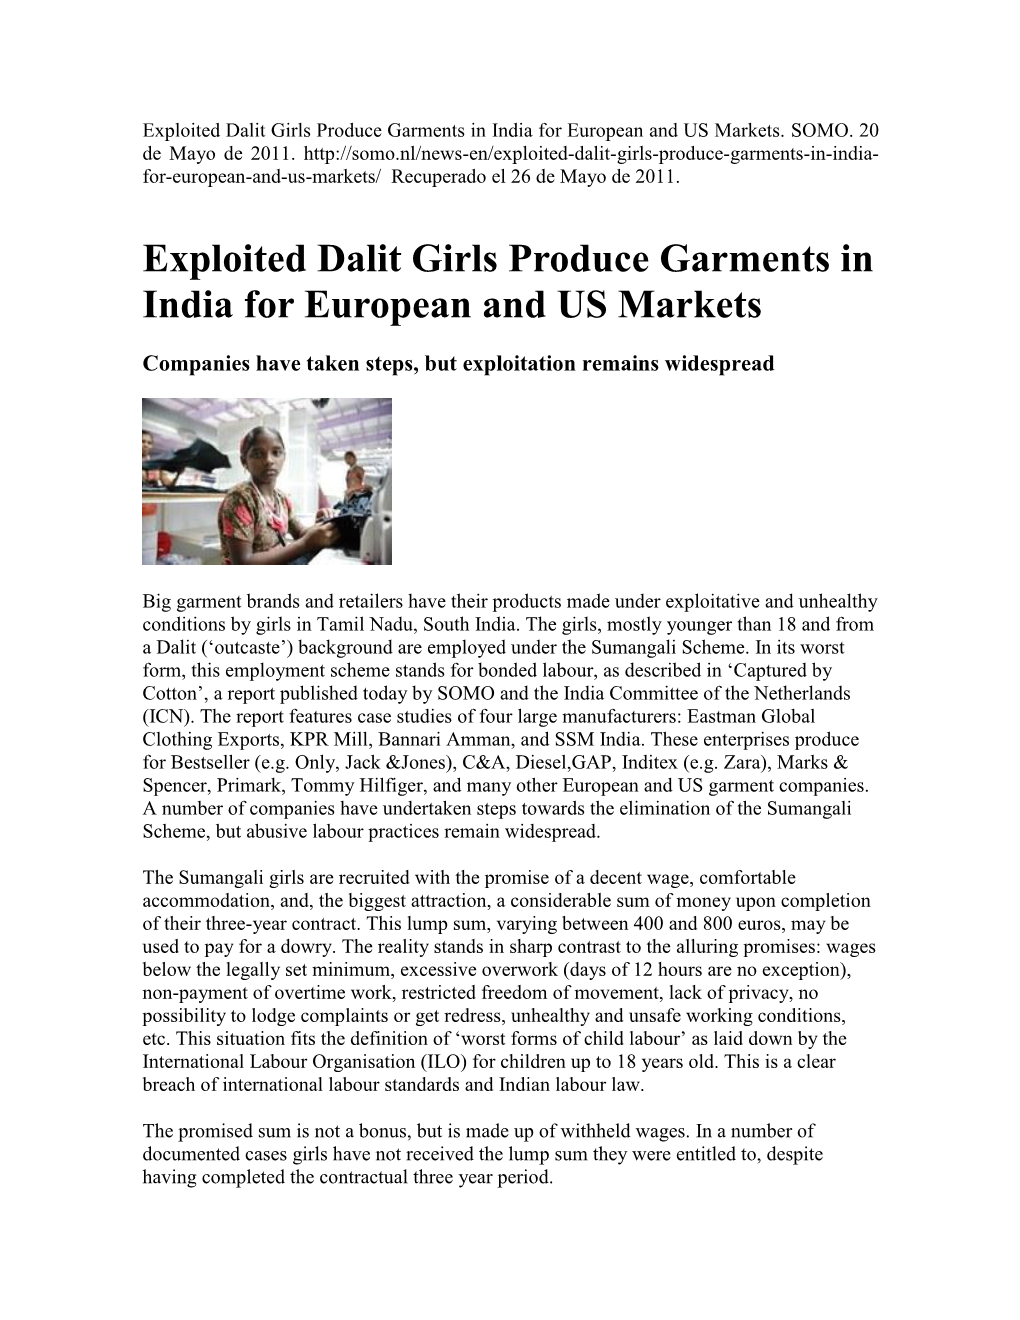 Exploited Dalit Girls Produce Garments in India for European and US Markets